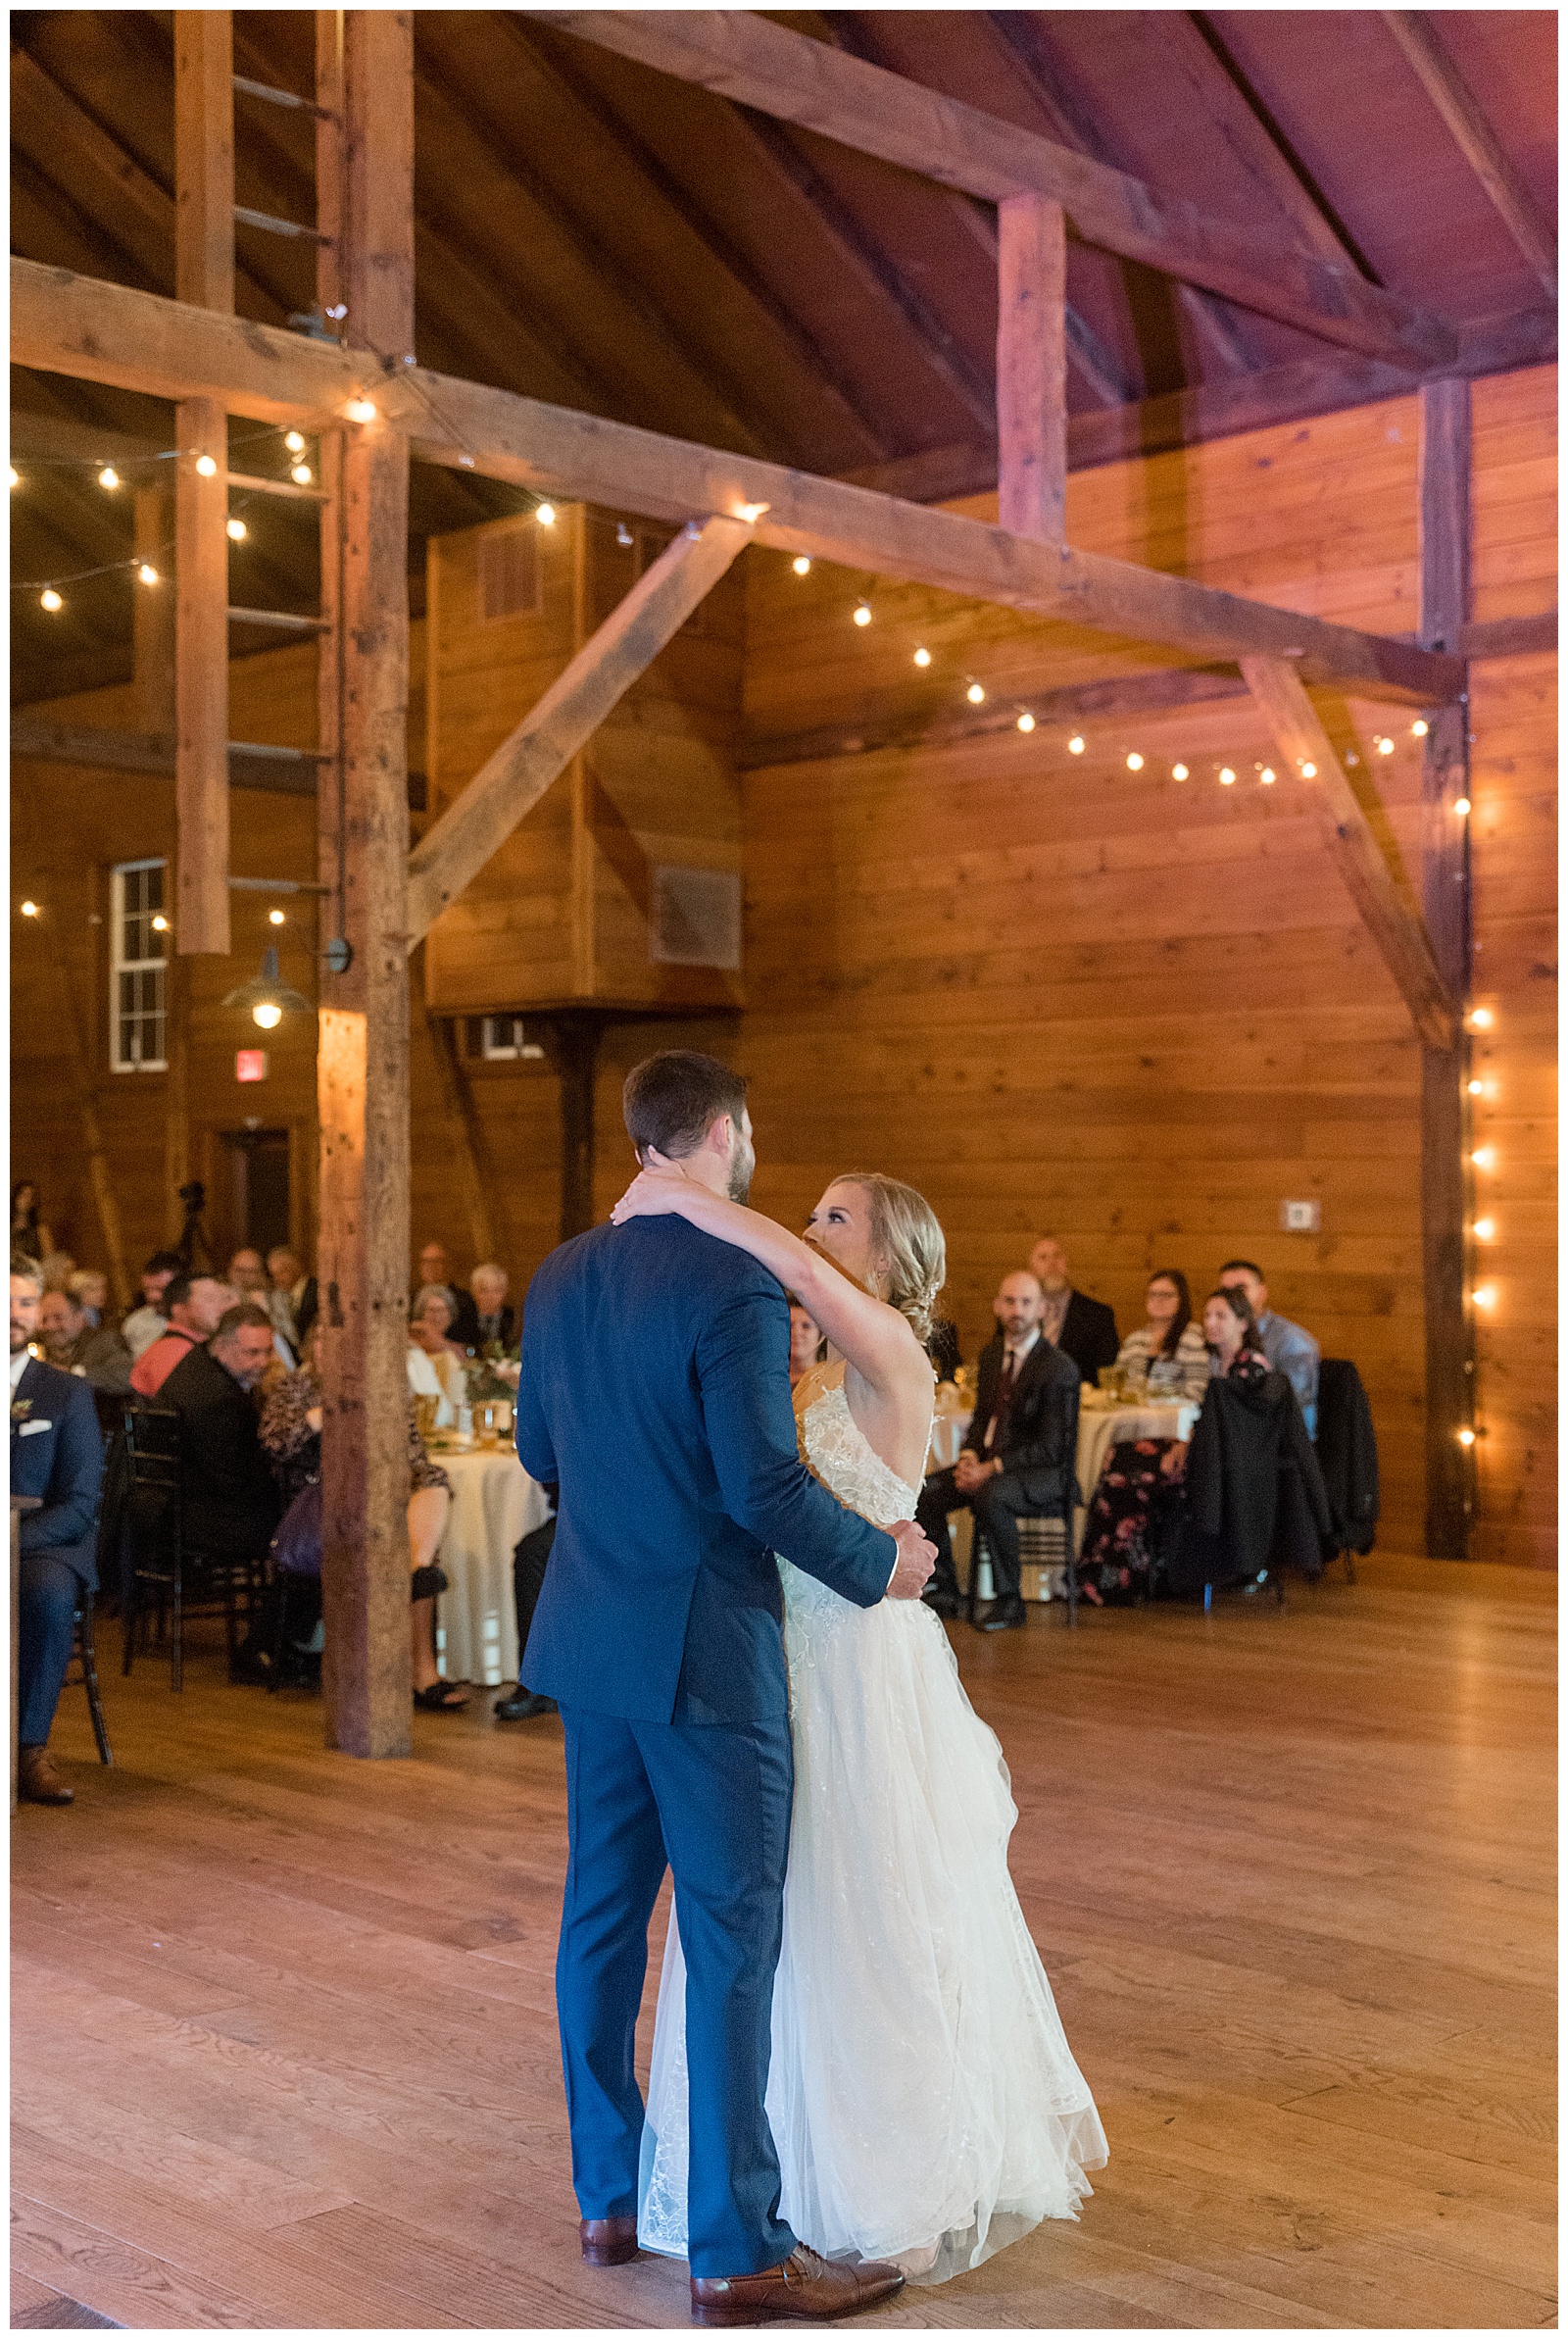 couple sharing their first dance as guests watch inside beautiful barn at historic ashland with glowing string lights